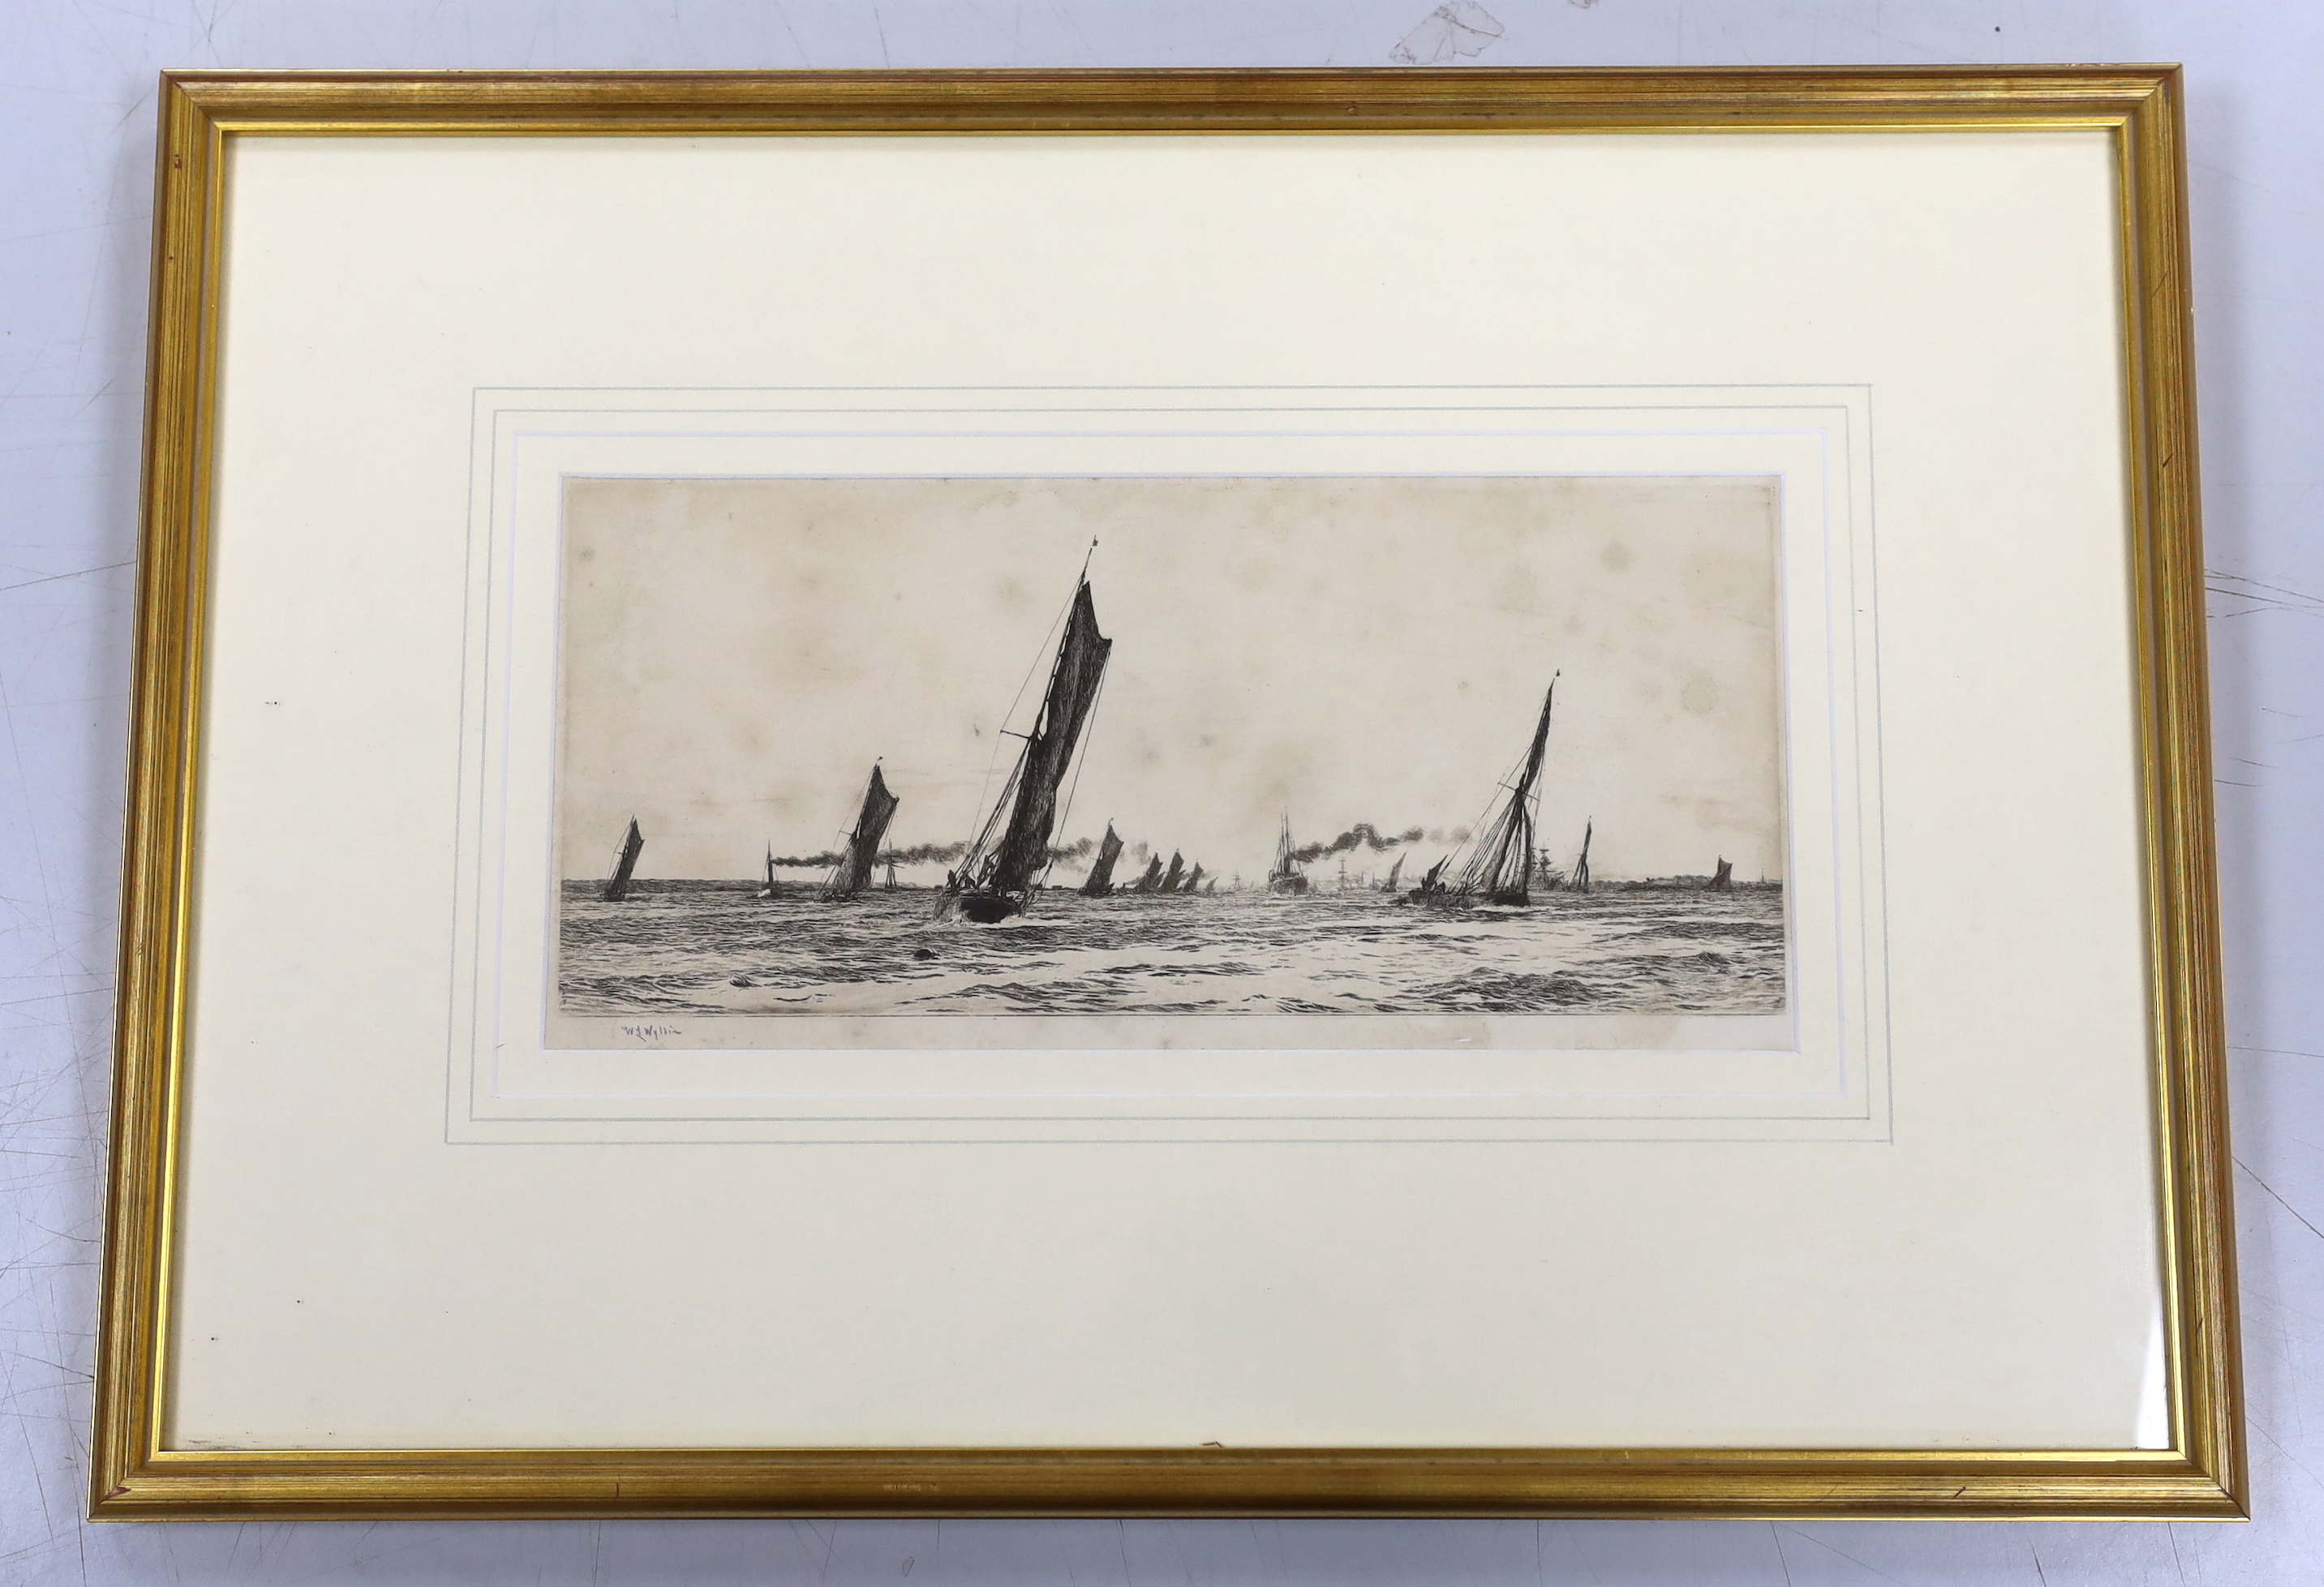 William Lionel Wyllie RA (1851-1931), etching, ‘A Fair Wind and an Ebb Tide’, signed in pencil, inscribed gallery label verso, 16 x 34cm